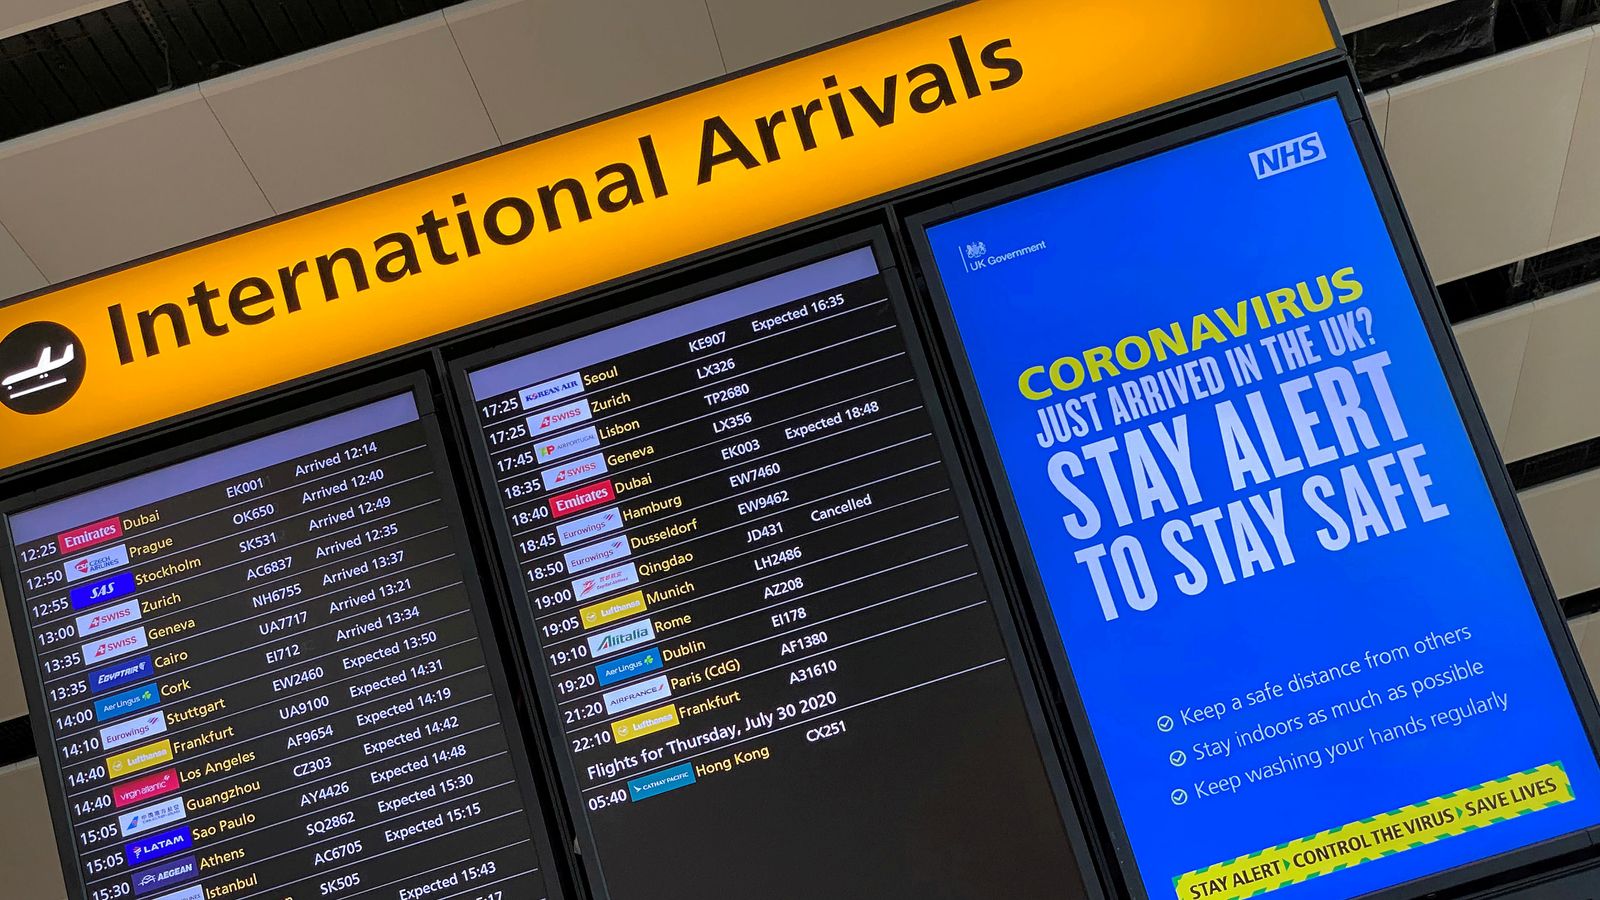 Strike to hit Heathrow Airport over Easter as passengers warned they face 'severe delays'